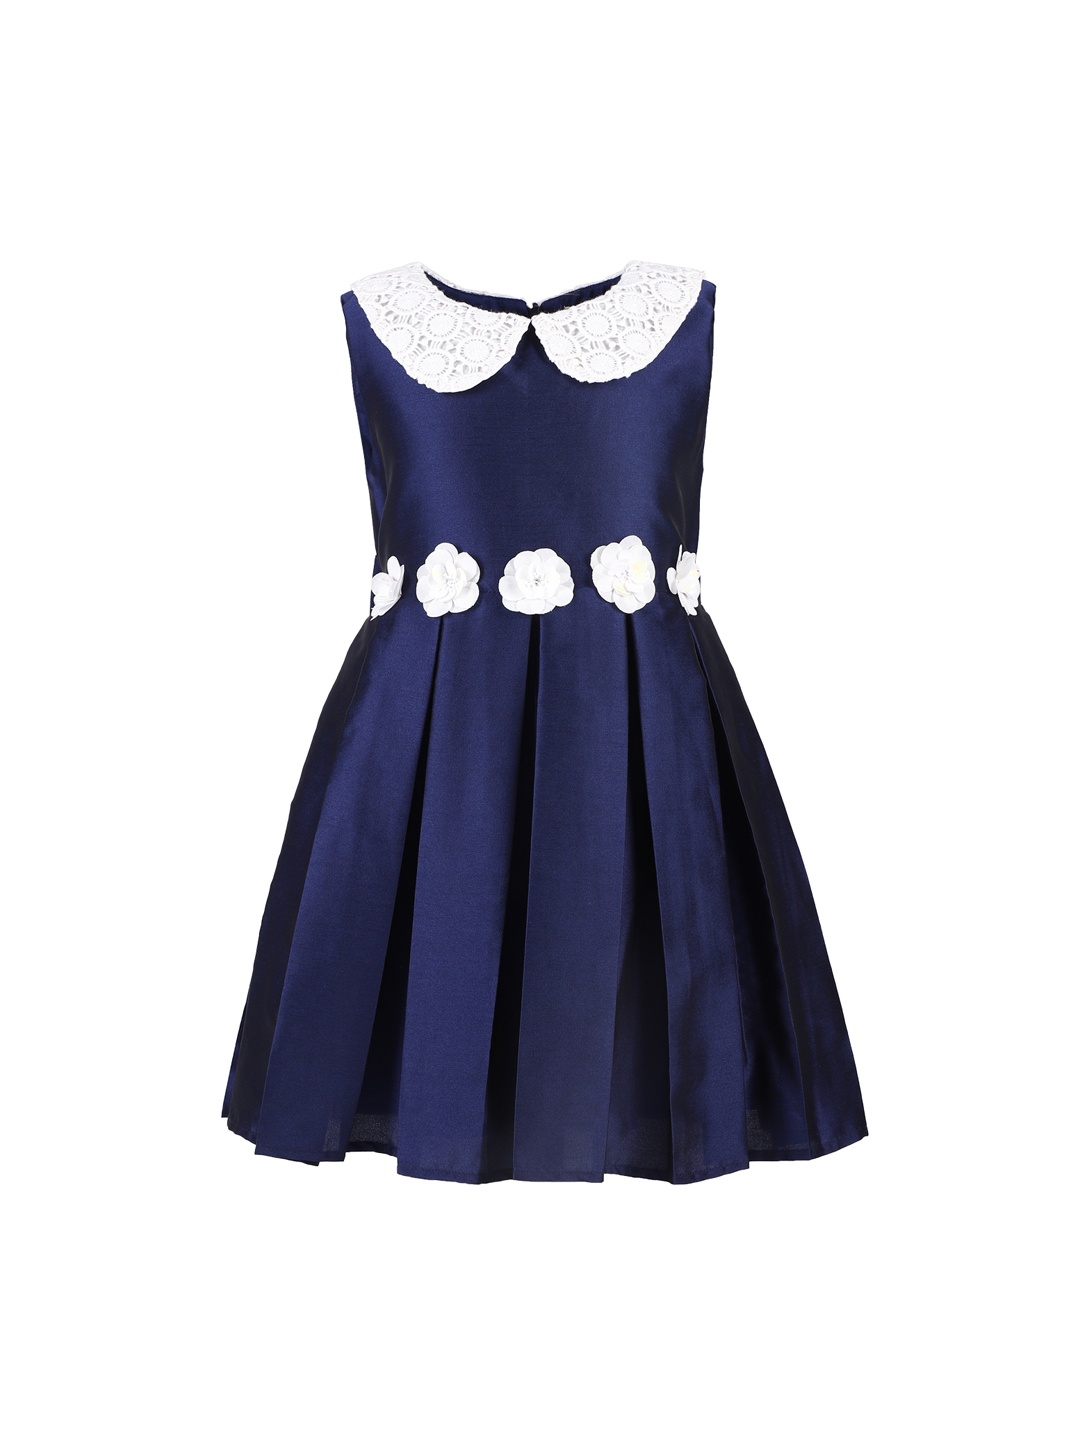 

A Little Fable Girls Navy Blue & White Solid Fit and Flare Dress